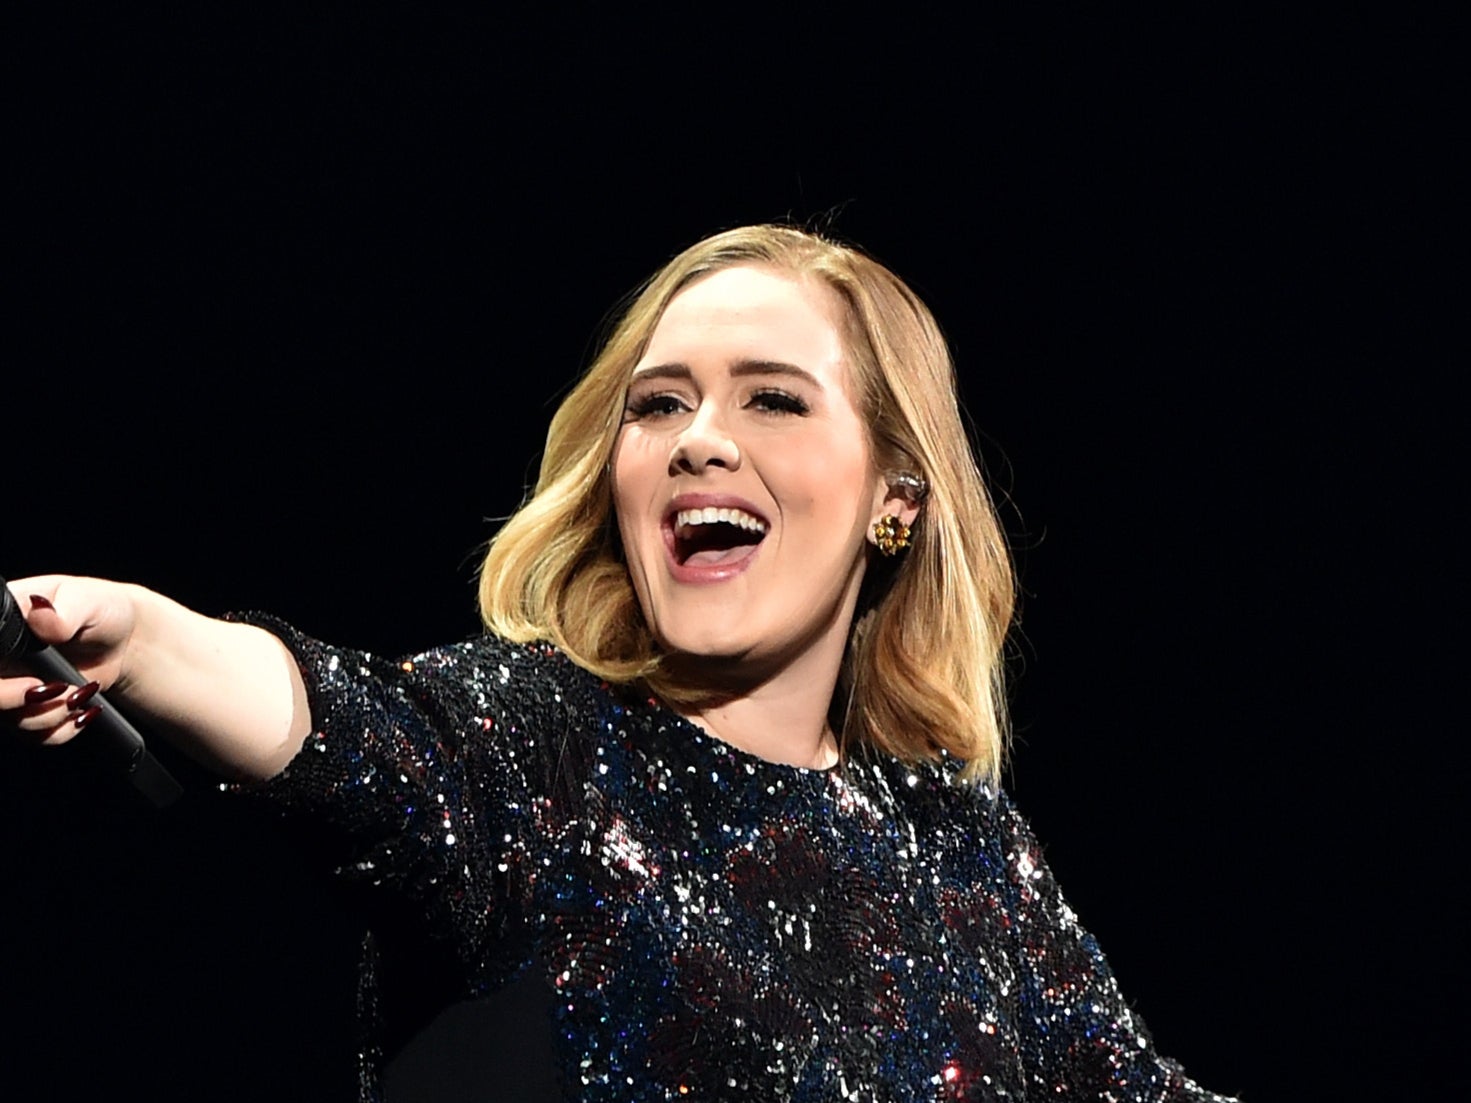 Adele has returned with her first new song since 2015